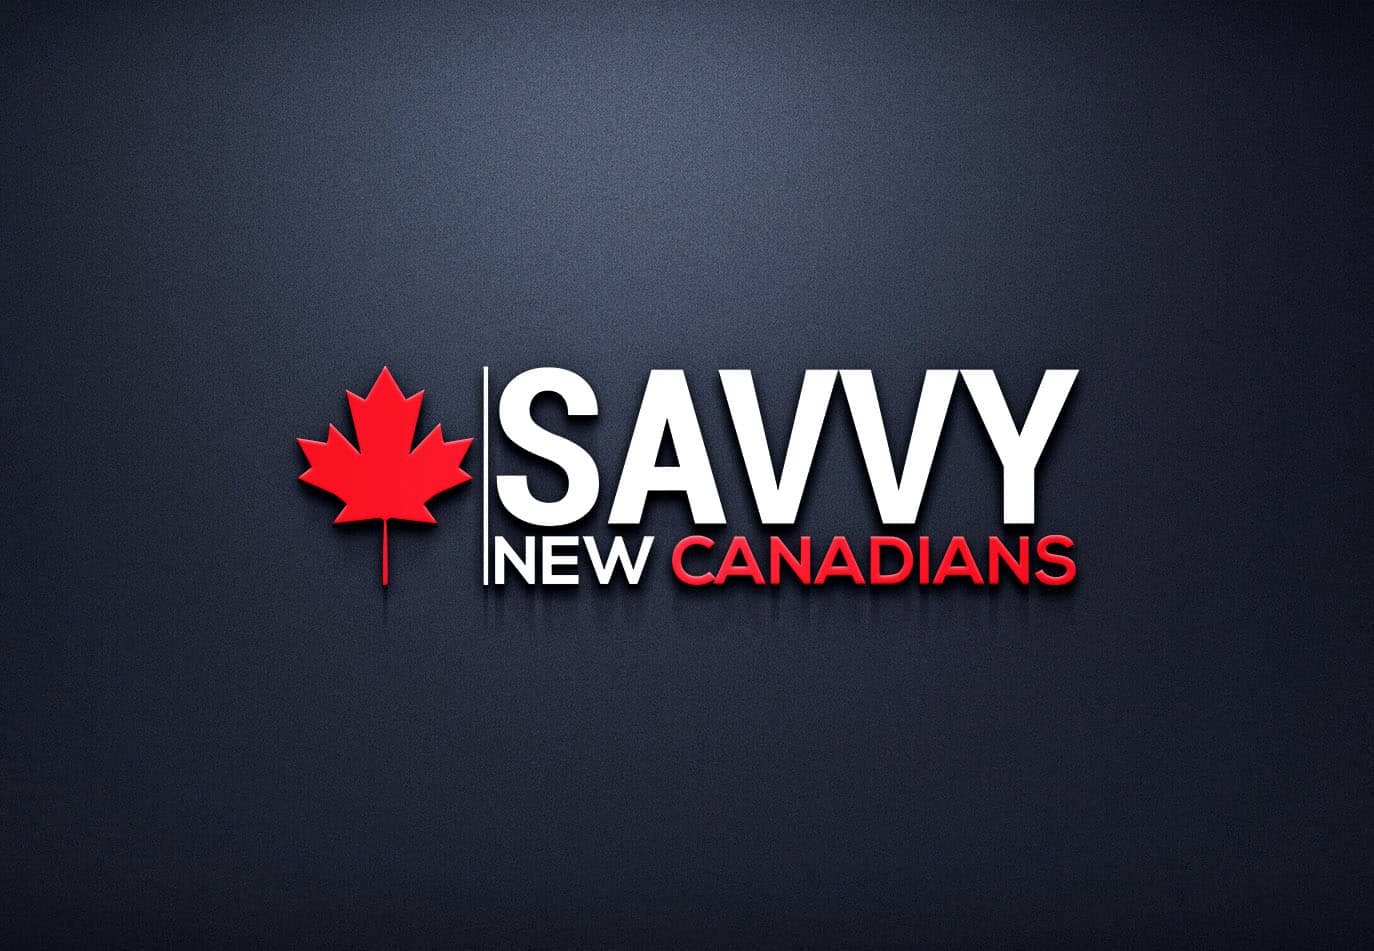 A bold and sleek logo featuring a red maple leaf symbolizing canada with the text 'savvy new canadians', capturing the spirit of informed, astute newcomers to canada against a dark background.